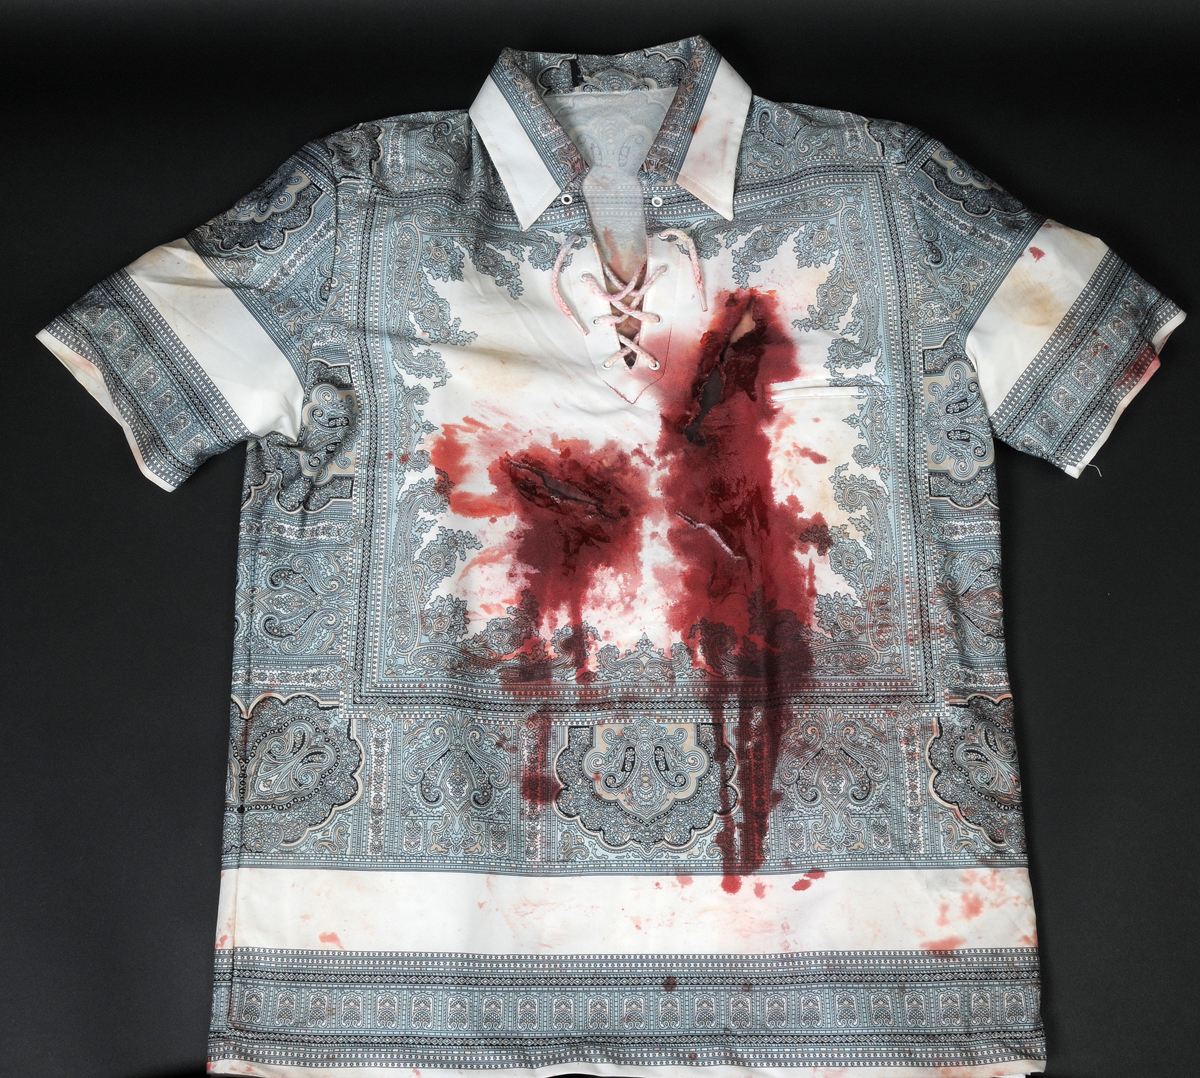 Shirt worn by Robert De Niro in "Cape Fear." Photo by Anthony Maddaloni.